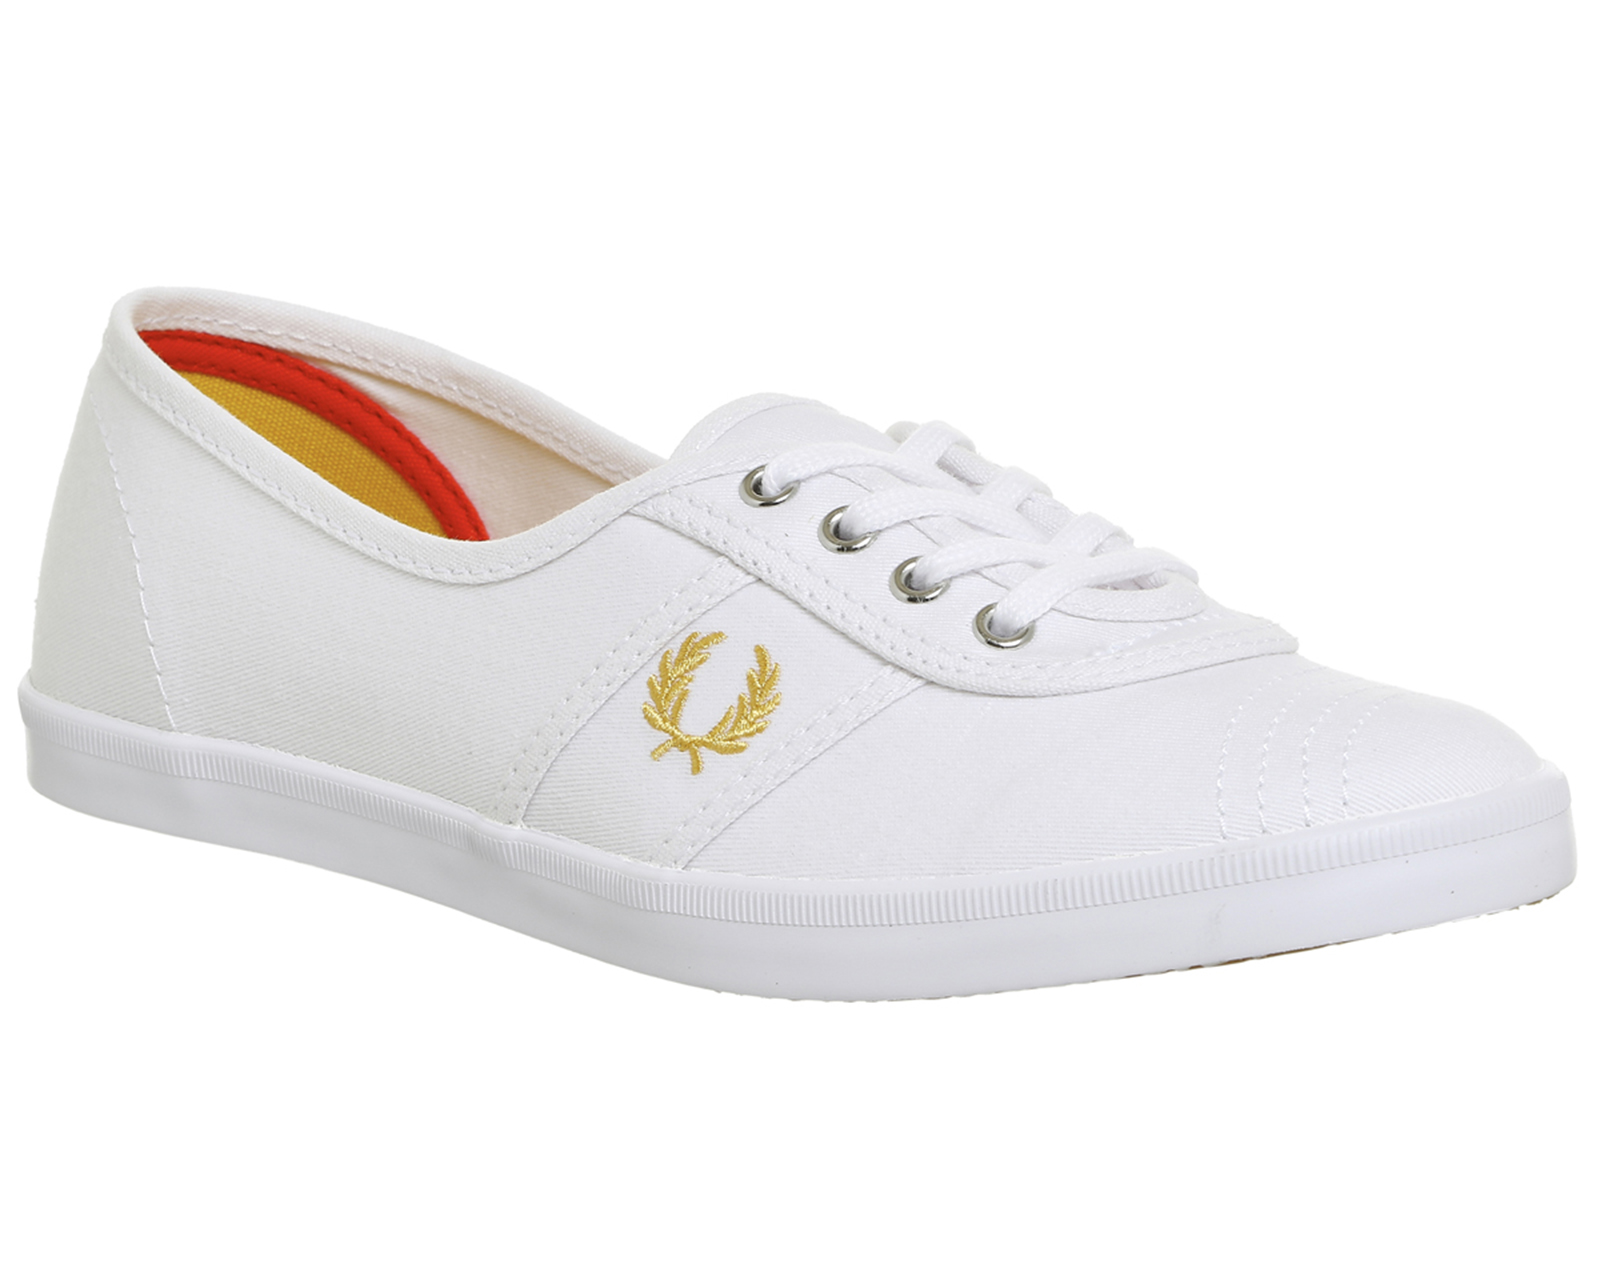 Fred Perry Aubrey Slip Ons White Twill - Hers trainers